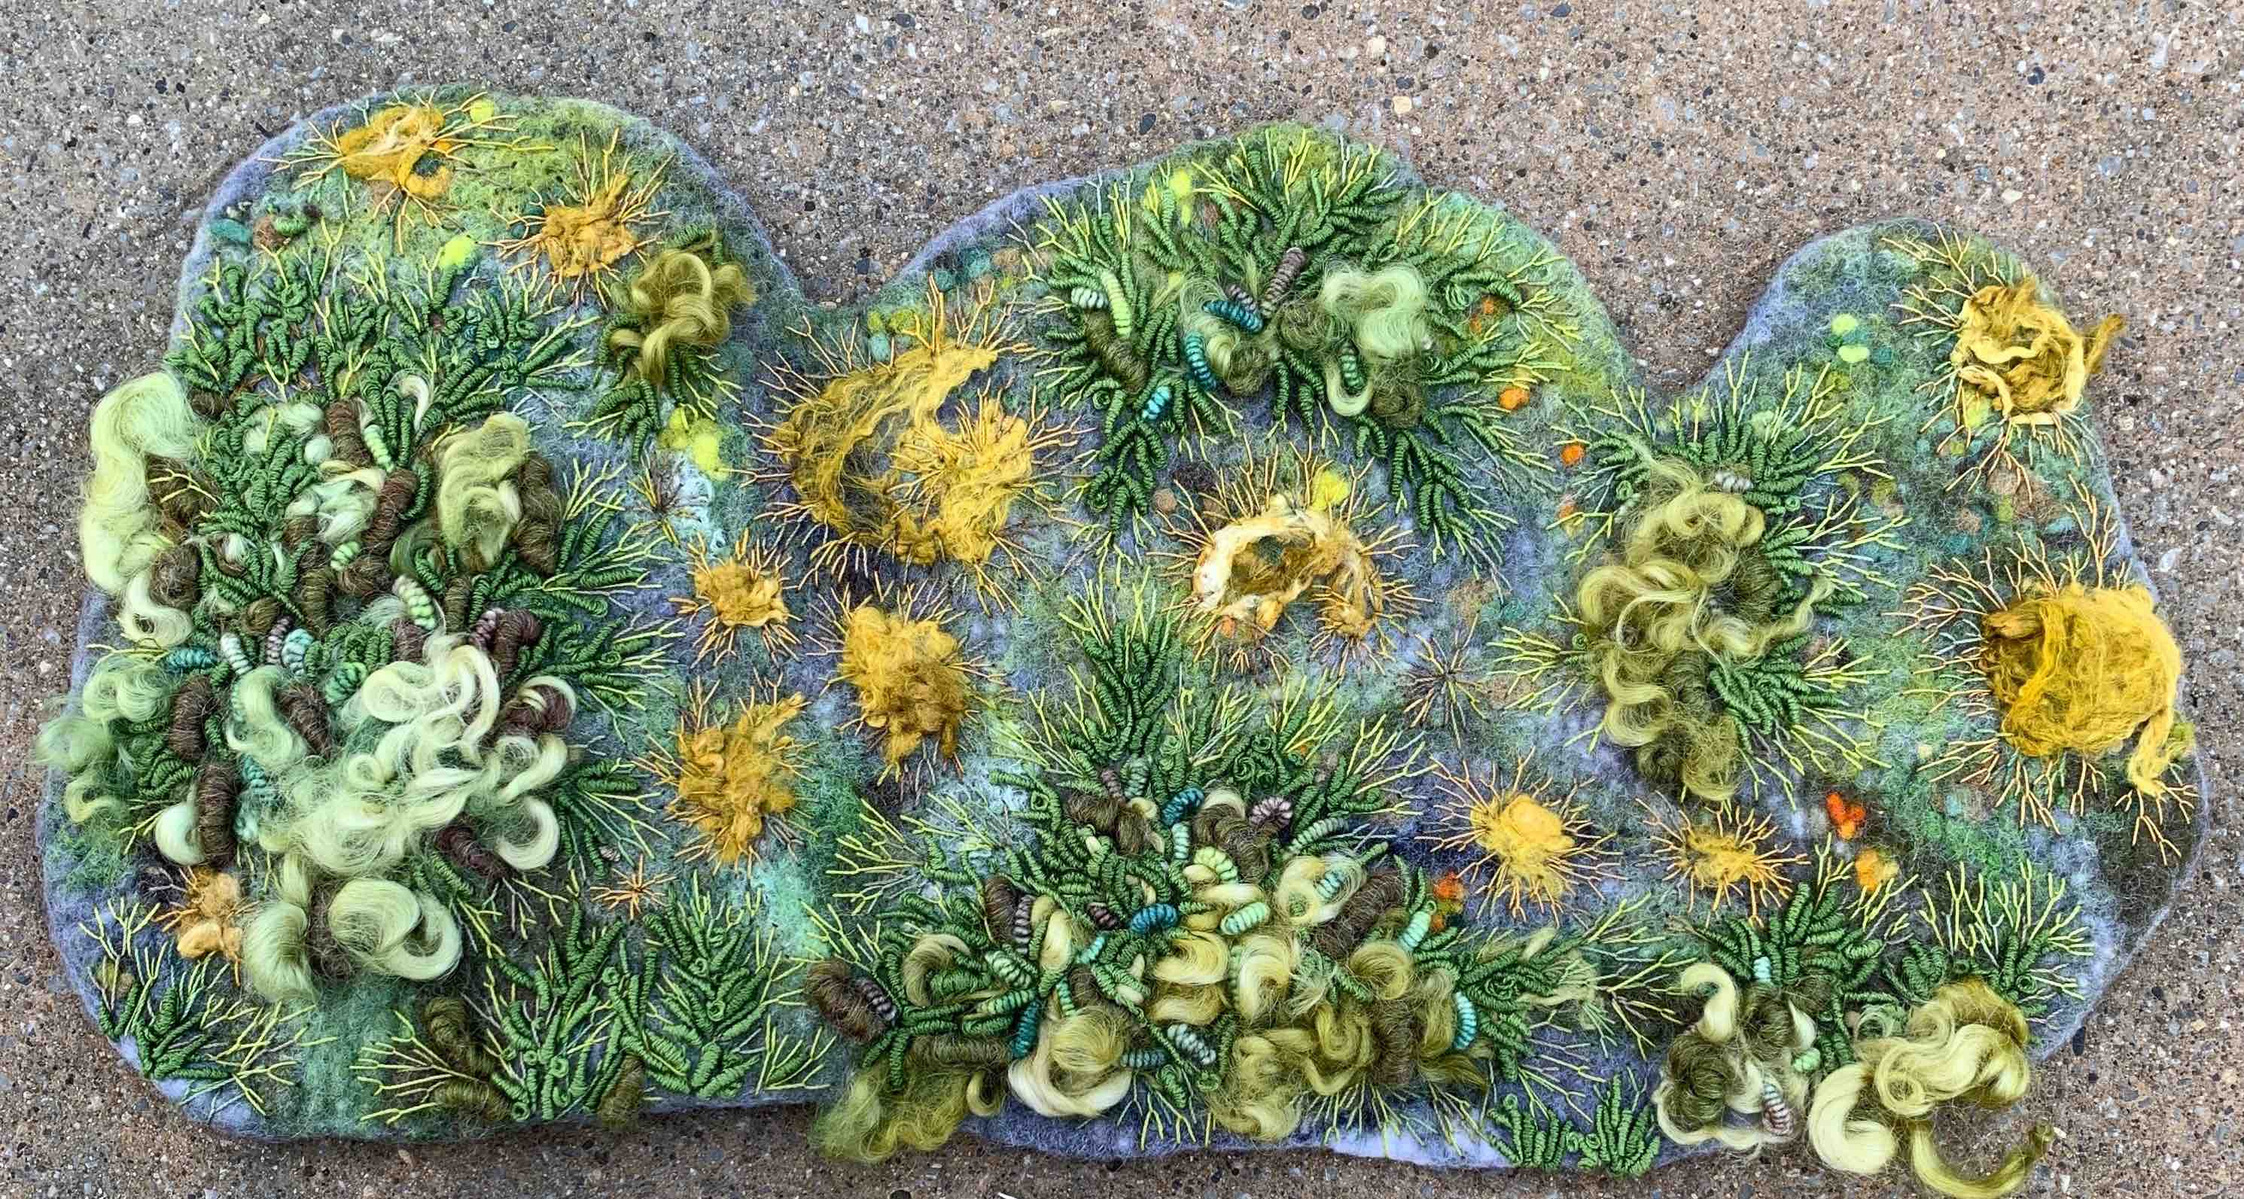 Wet felted textile art. The felt artist Lynn Comley has created a moss and lichen study in stitch on a piece of hand crafted wool felt.